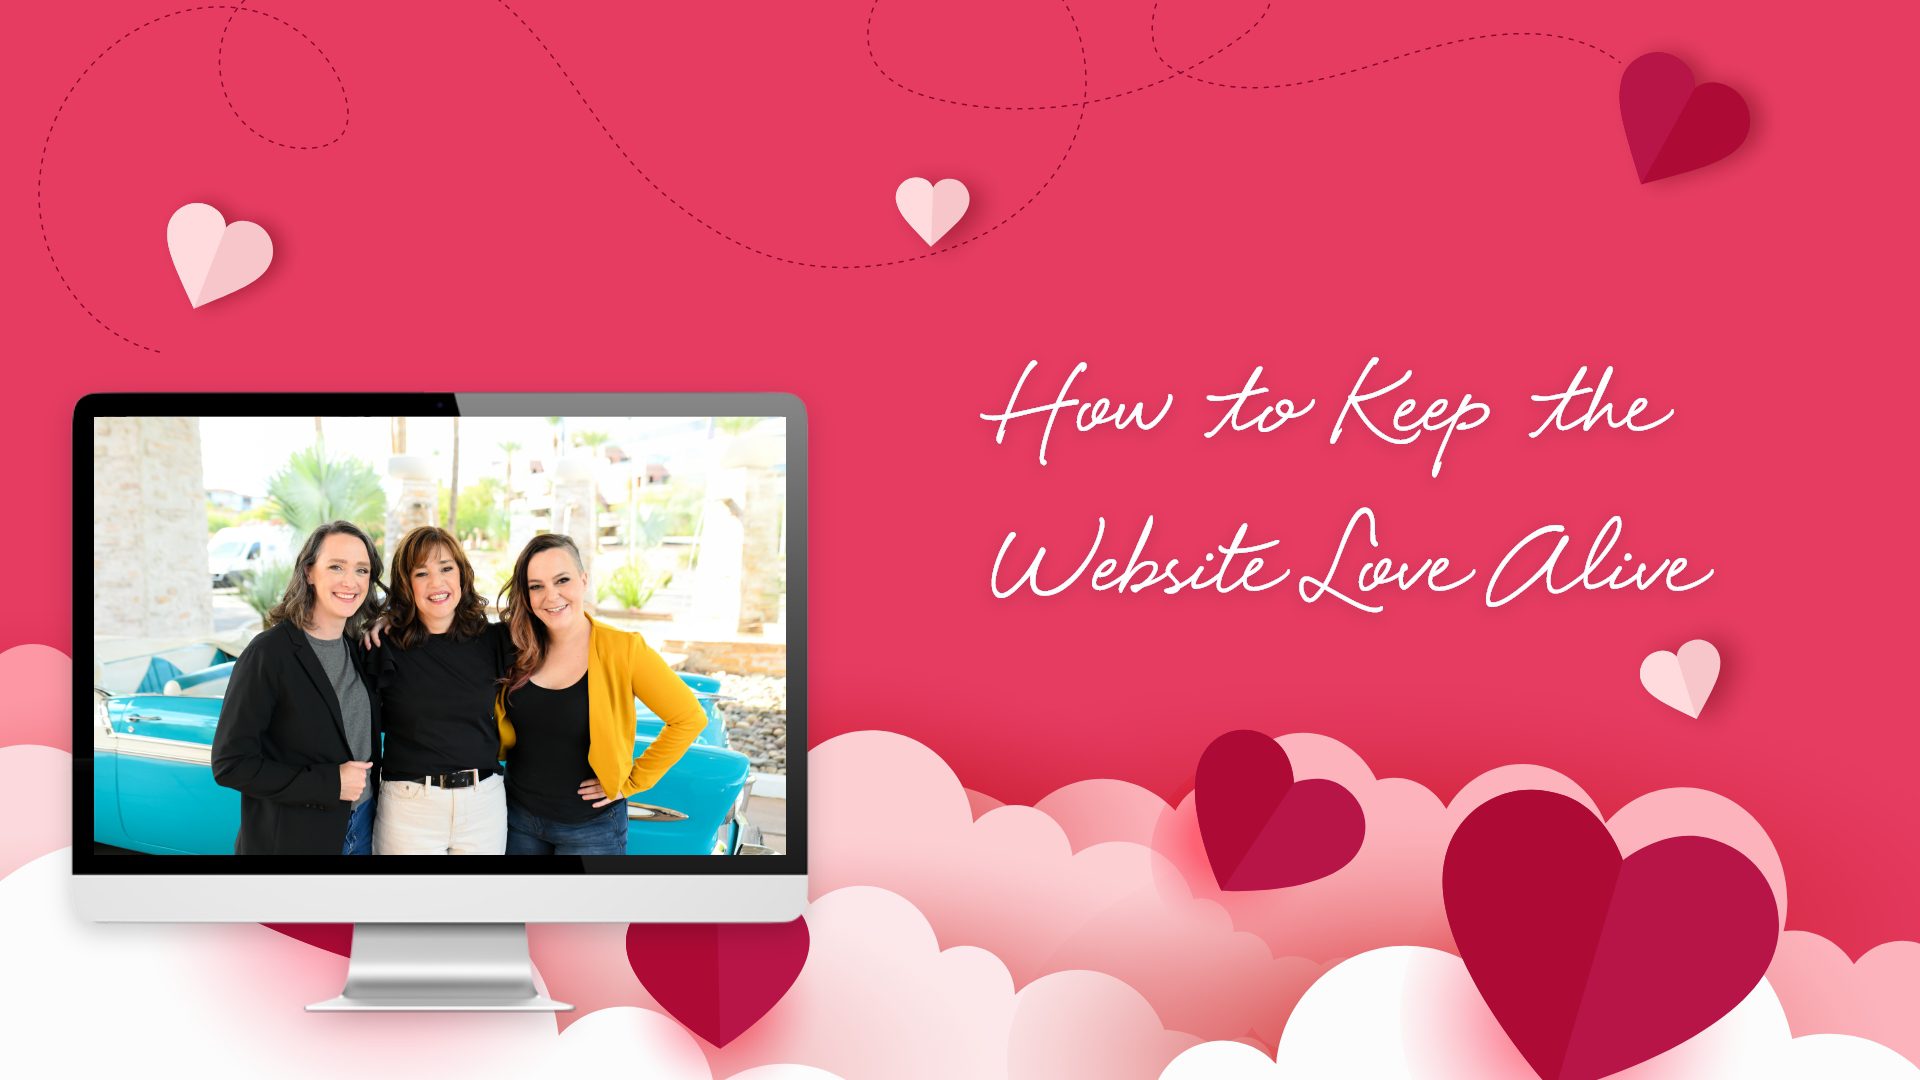 How to Keep the Website Love Alive